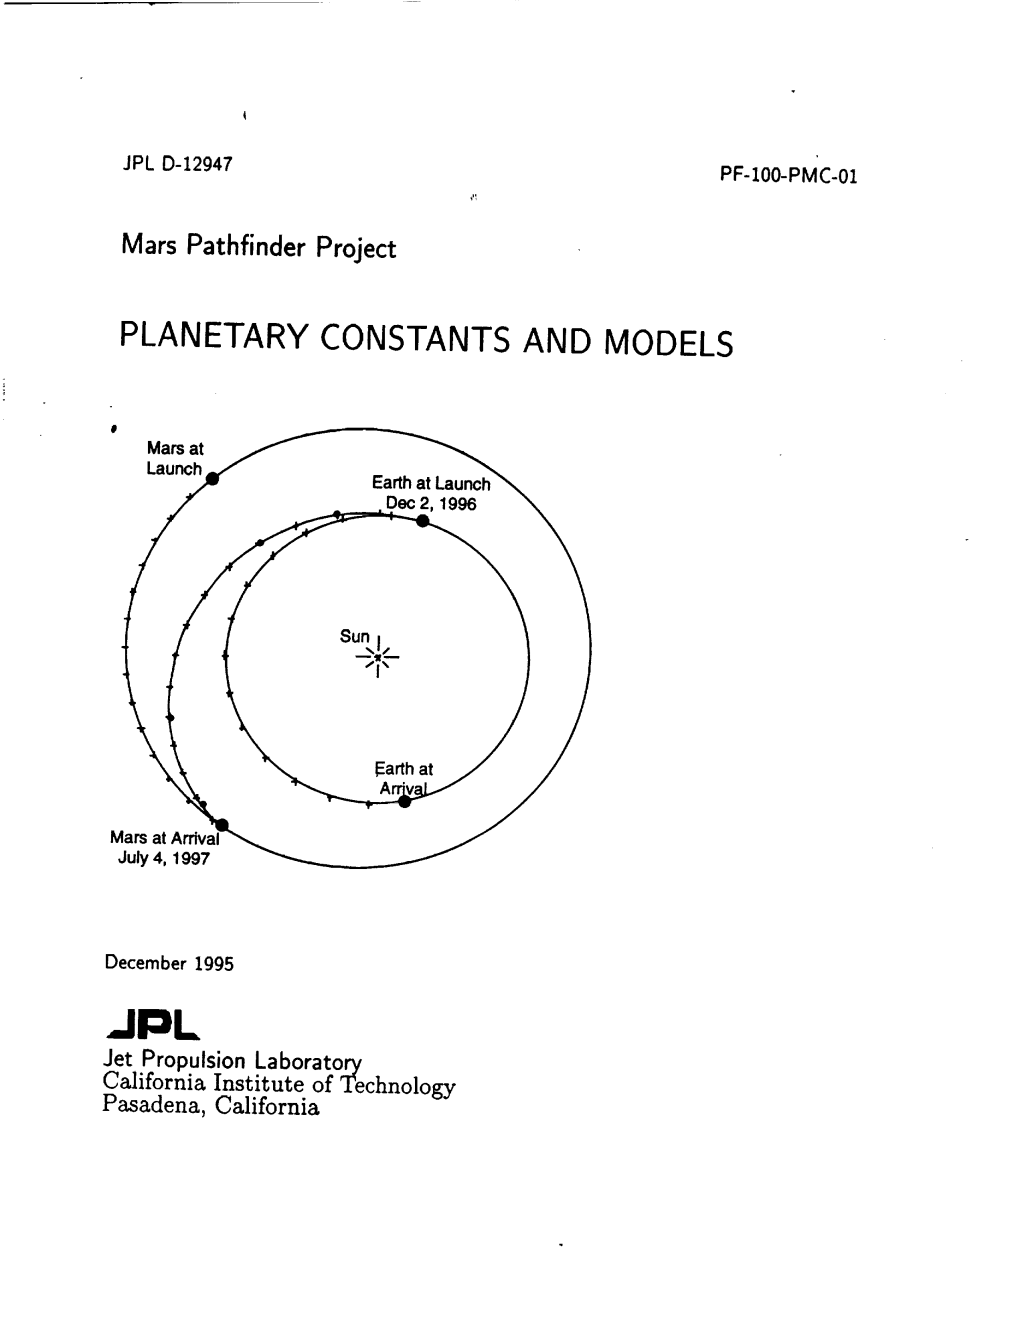 Planetary Constants and Models